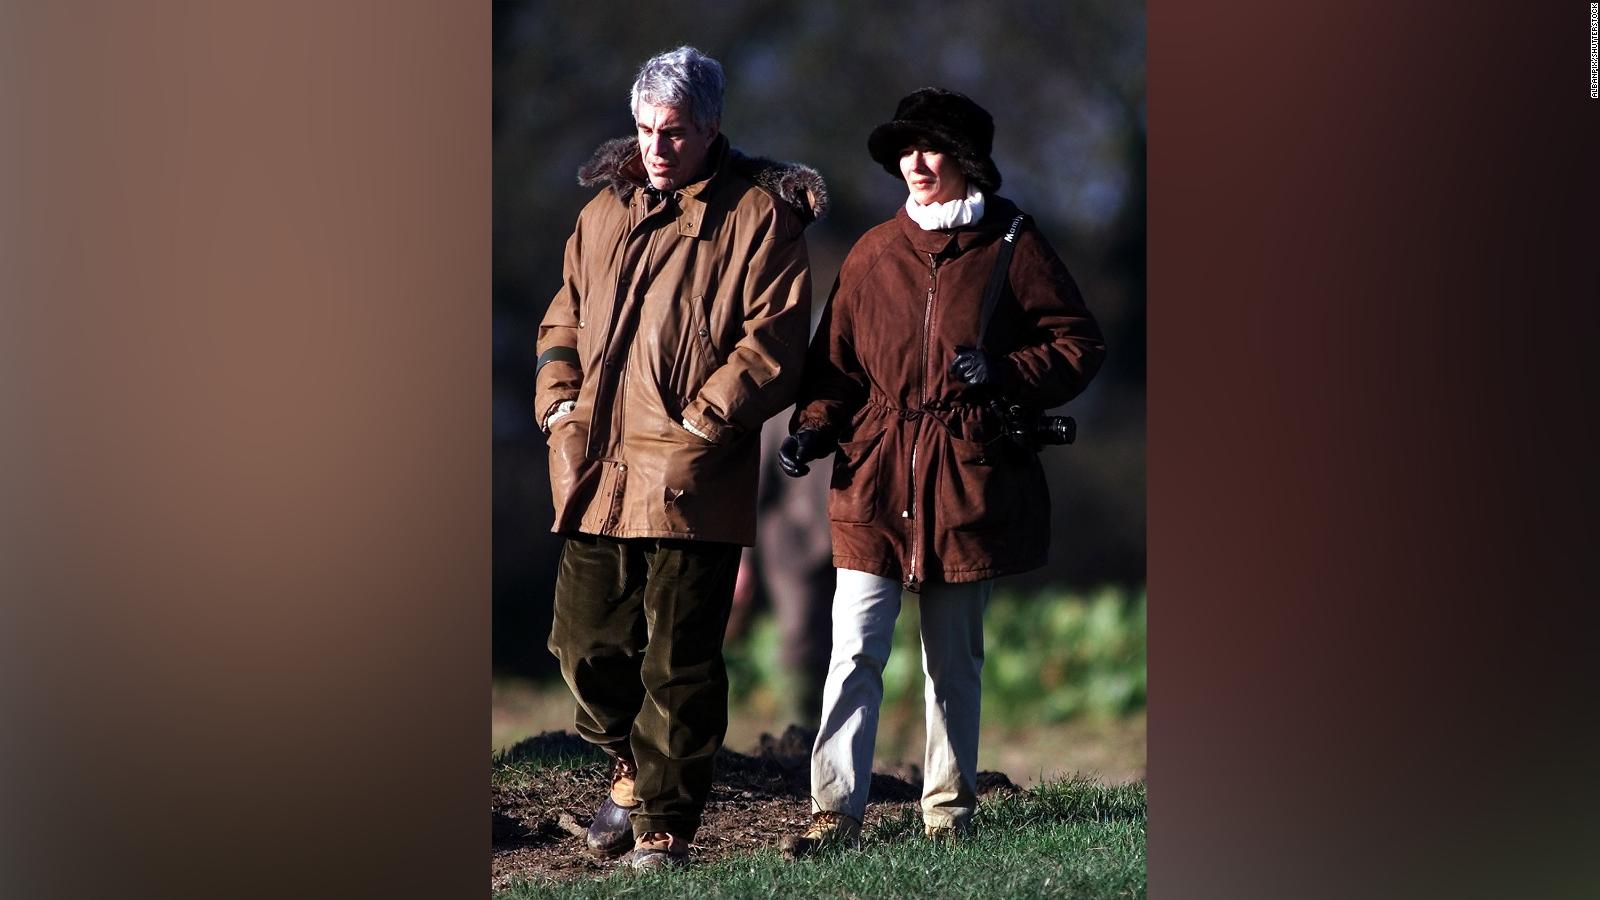 Who Is Ghislaine Maxwell The Woman At The Center Of The Jeffrey Epstein Scandal Cnn